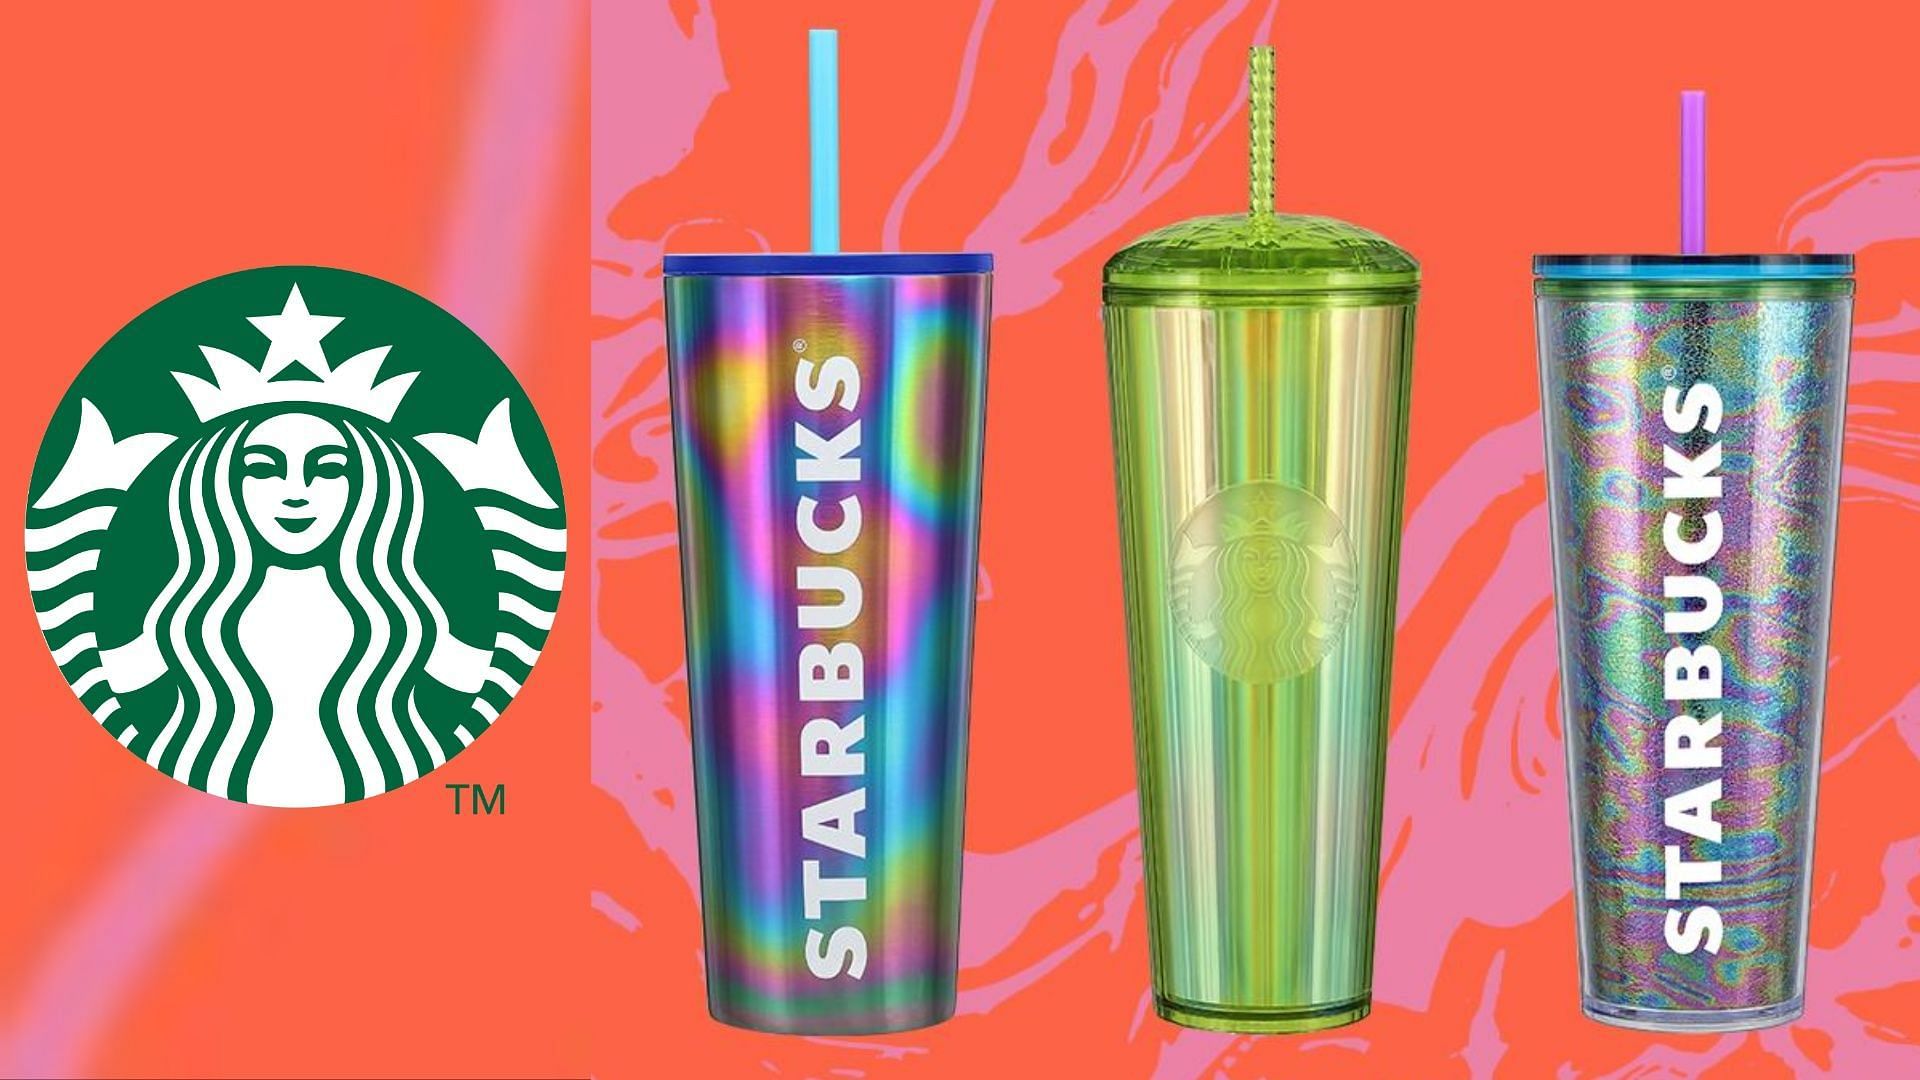 Starbucks extends its summer drinkware collection with new cups and tumblers (Image via Starbucks)